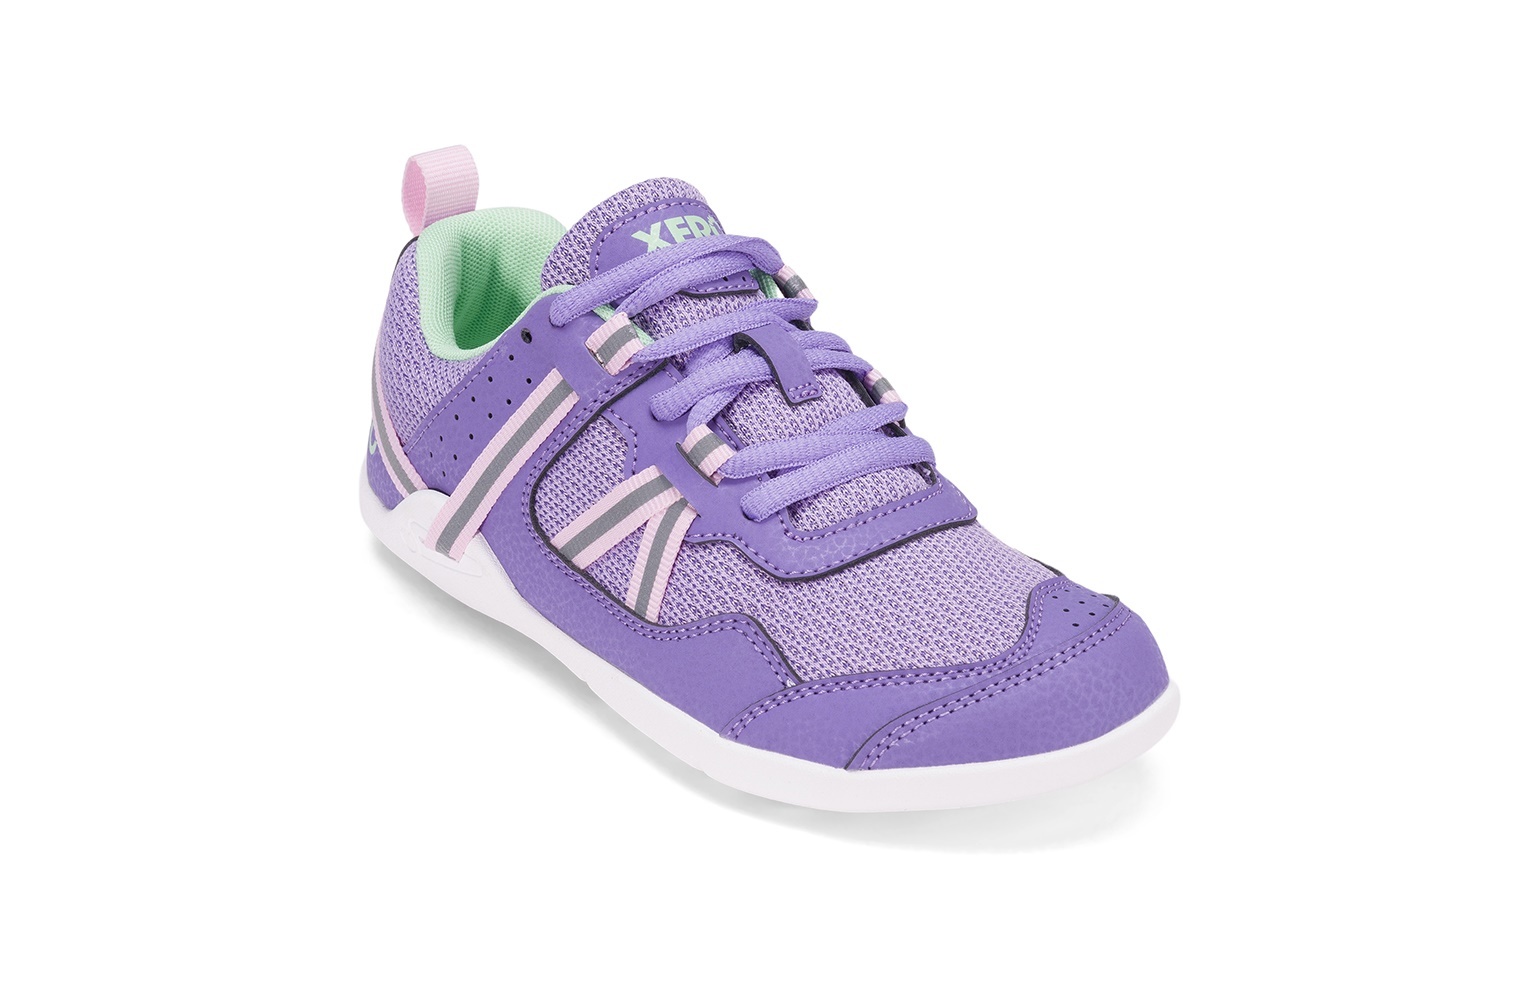 Xero Shoes, Prio - PRY-LCK - lilac/pink, kind, maat 33 eu